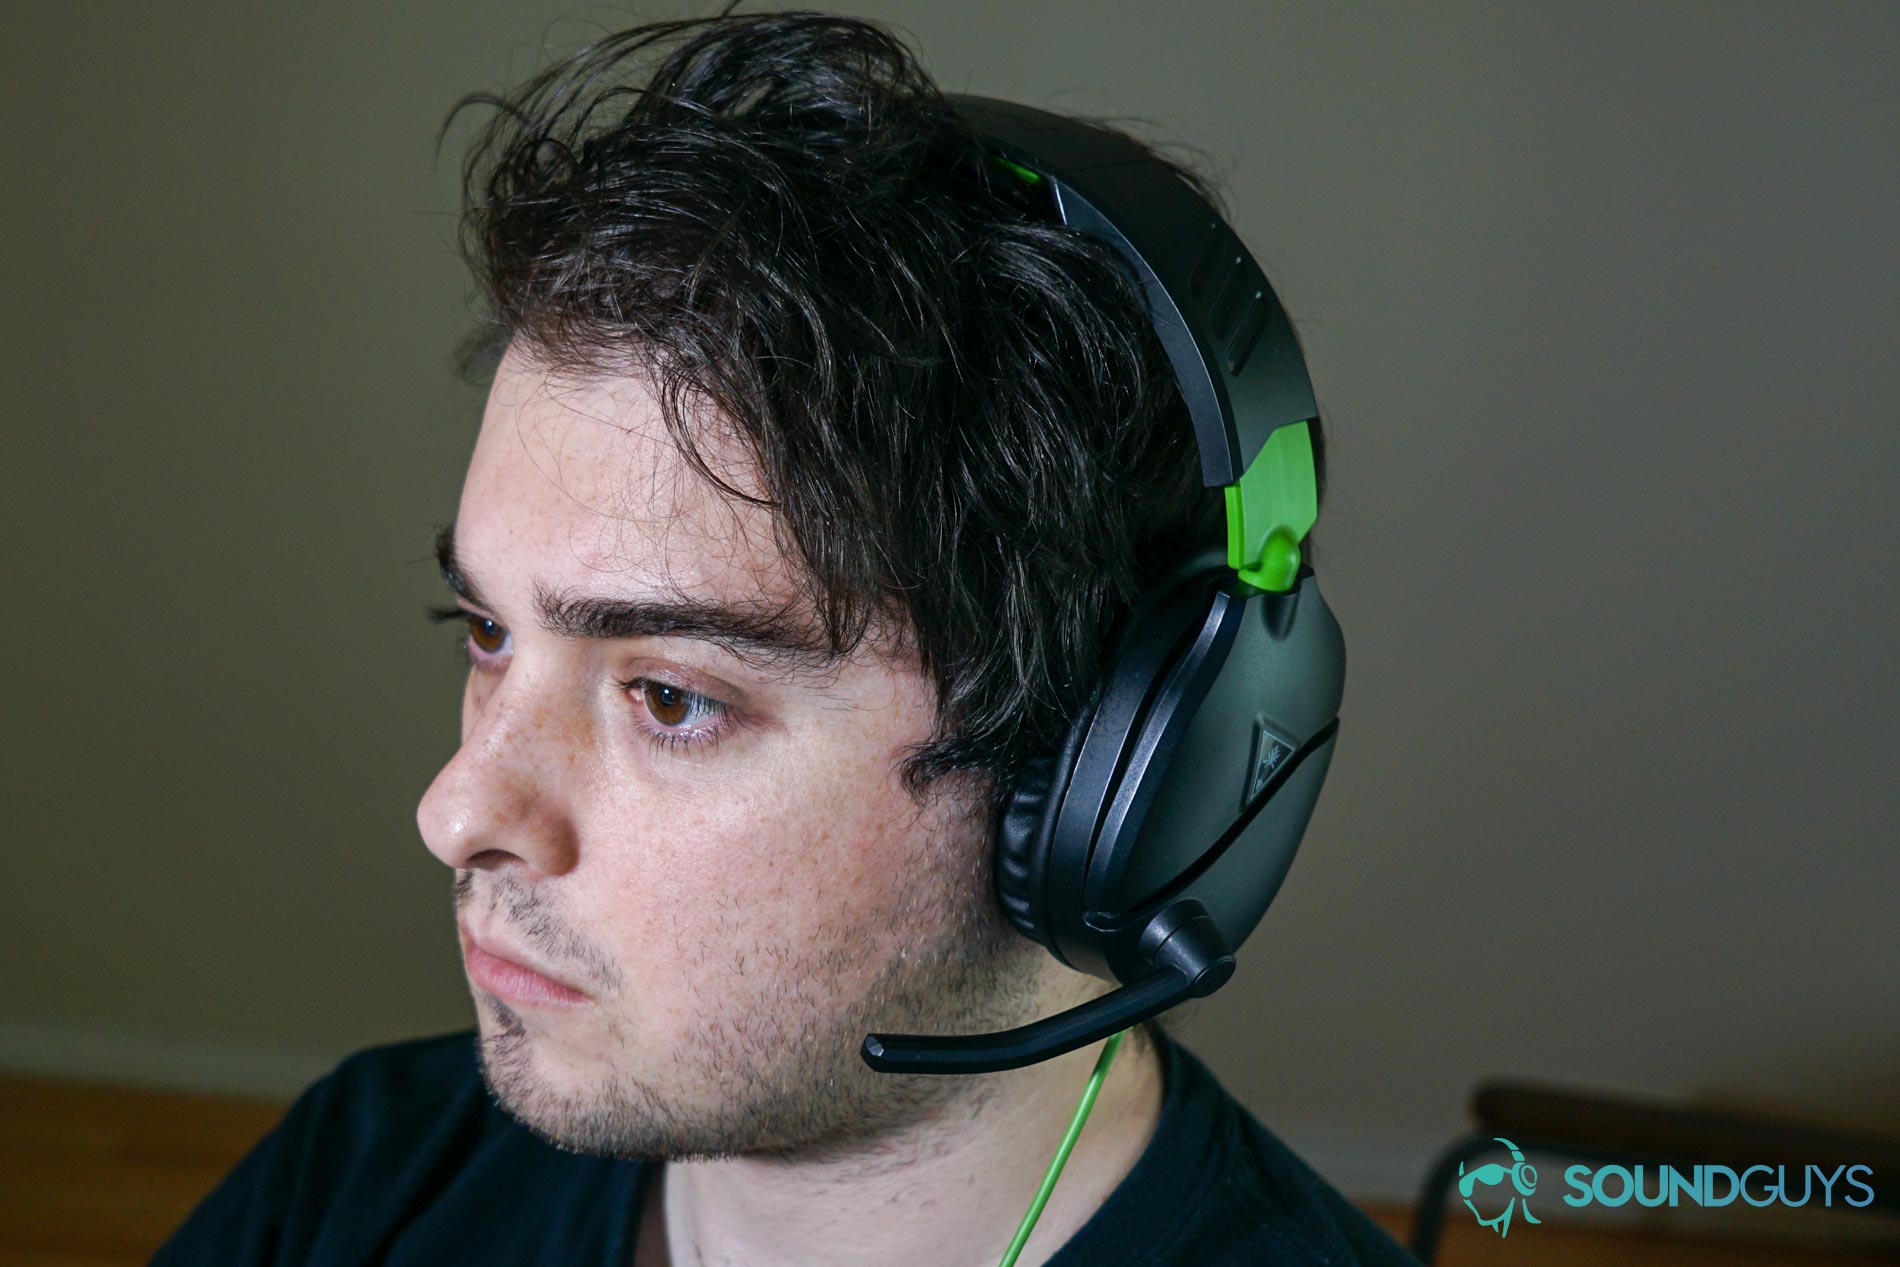 A man wears The Turtle Beach Recon 70 gaming headset sitting at a PC.